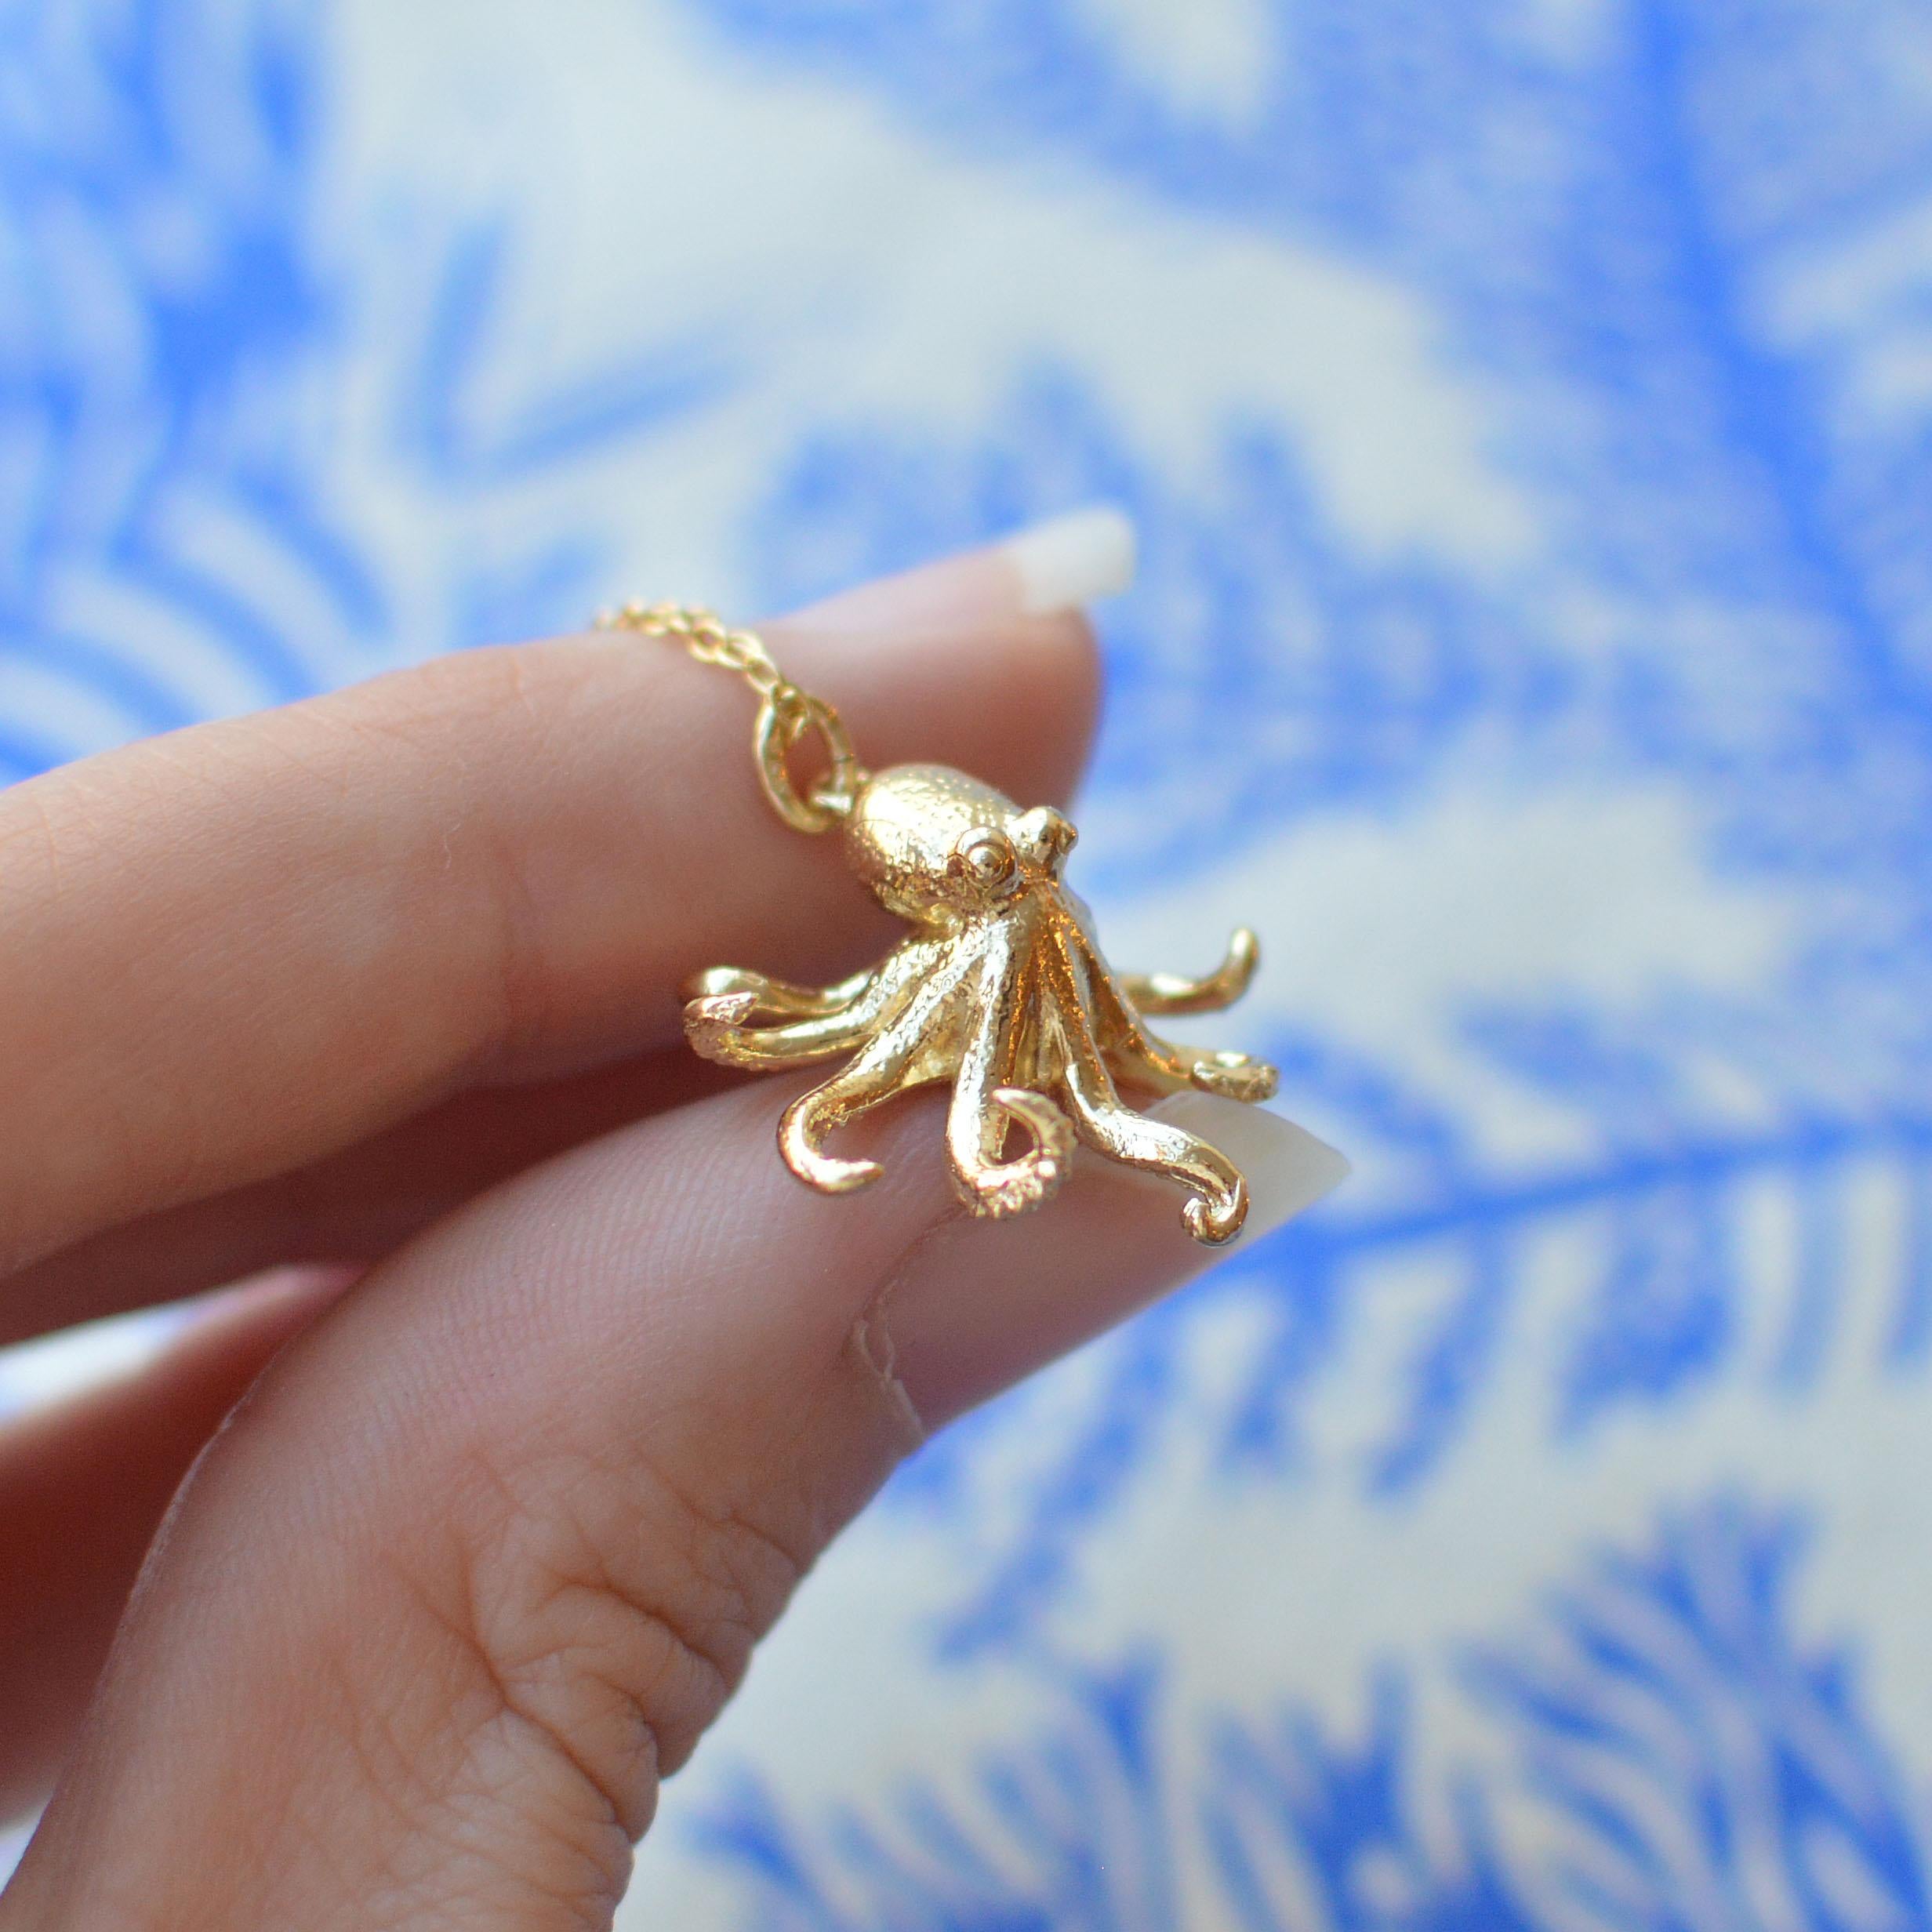 This detailed little octopus pendant is cast in solid 18 Carat gold and finished by hand, and is created from Lucy's original hand-sculpted design. 

This intricate octopus pendant is made in London, United Kingdom using recycled or Fairtrade Gold.